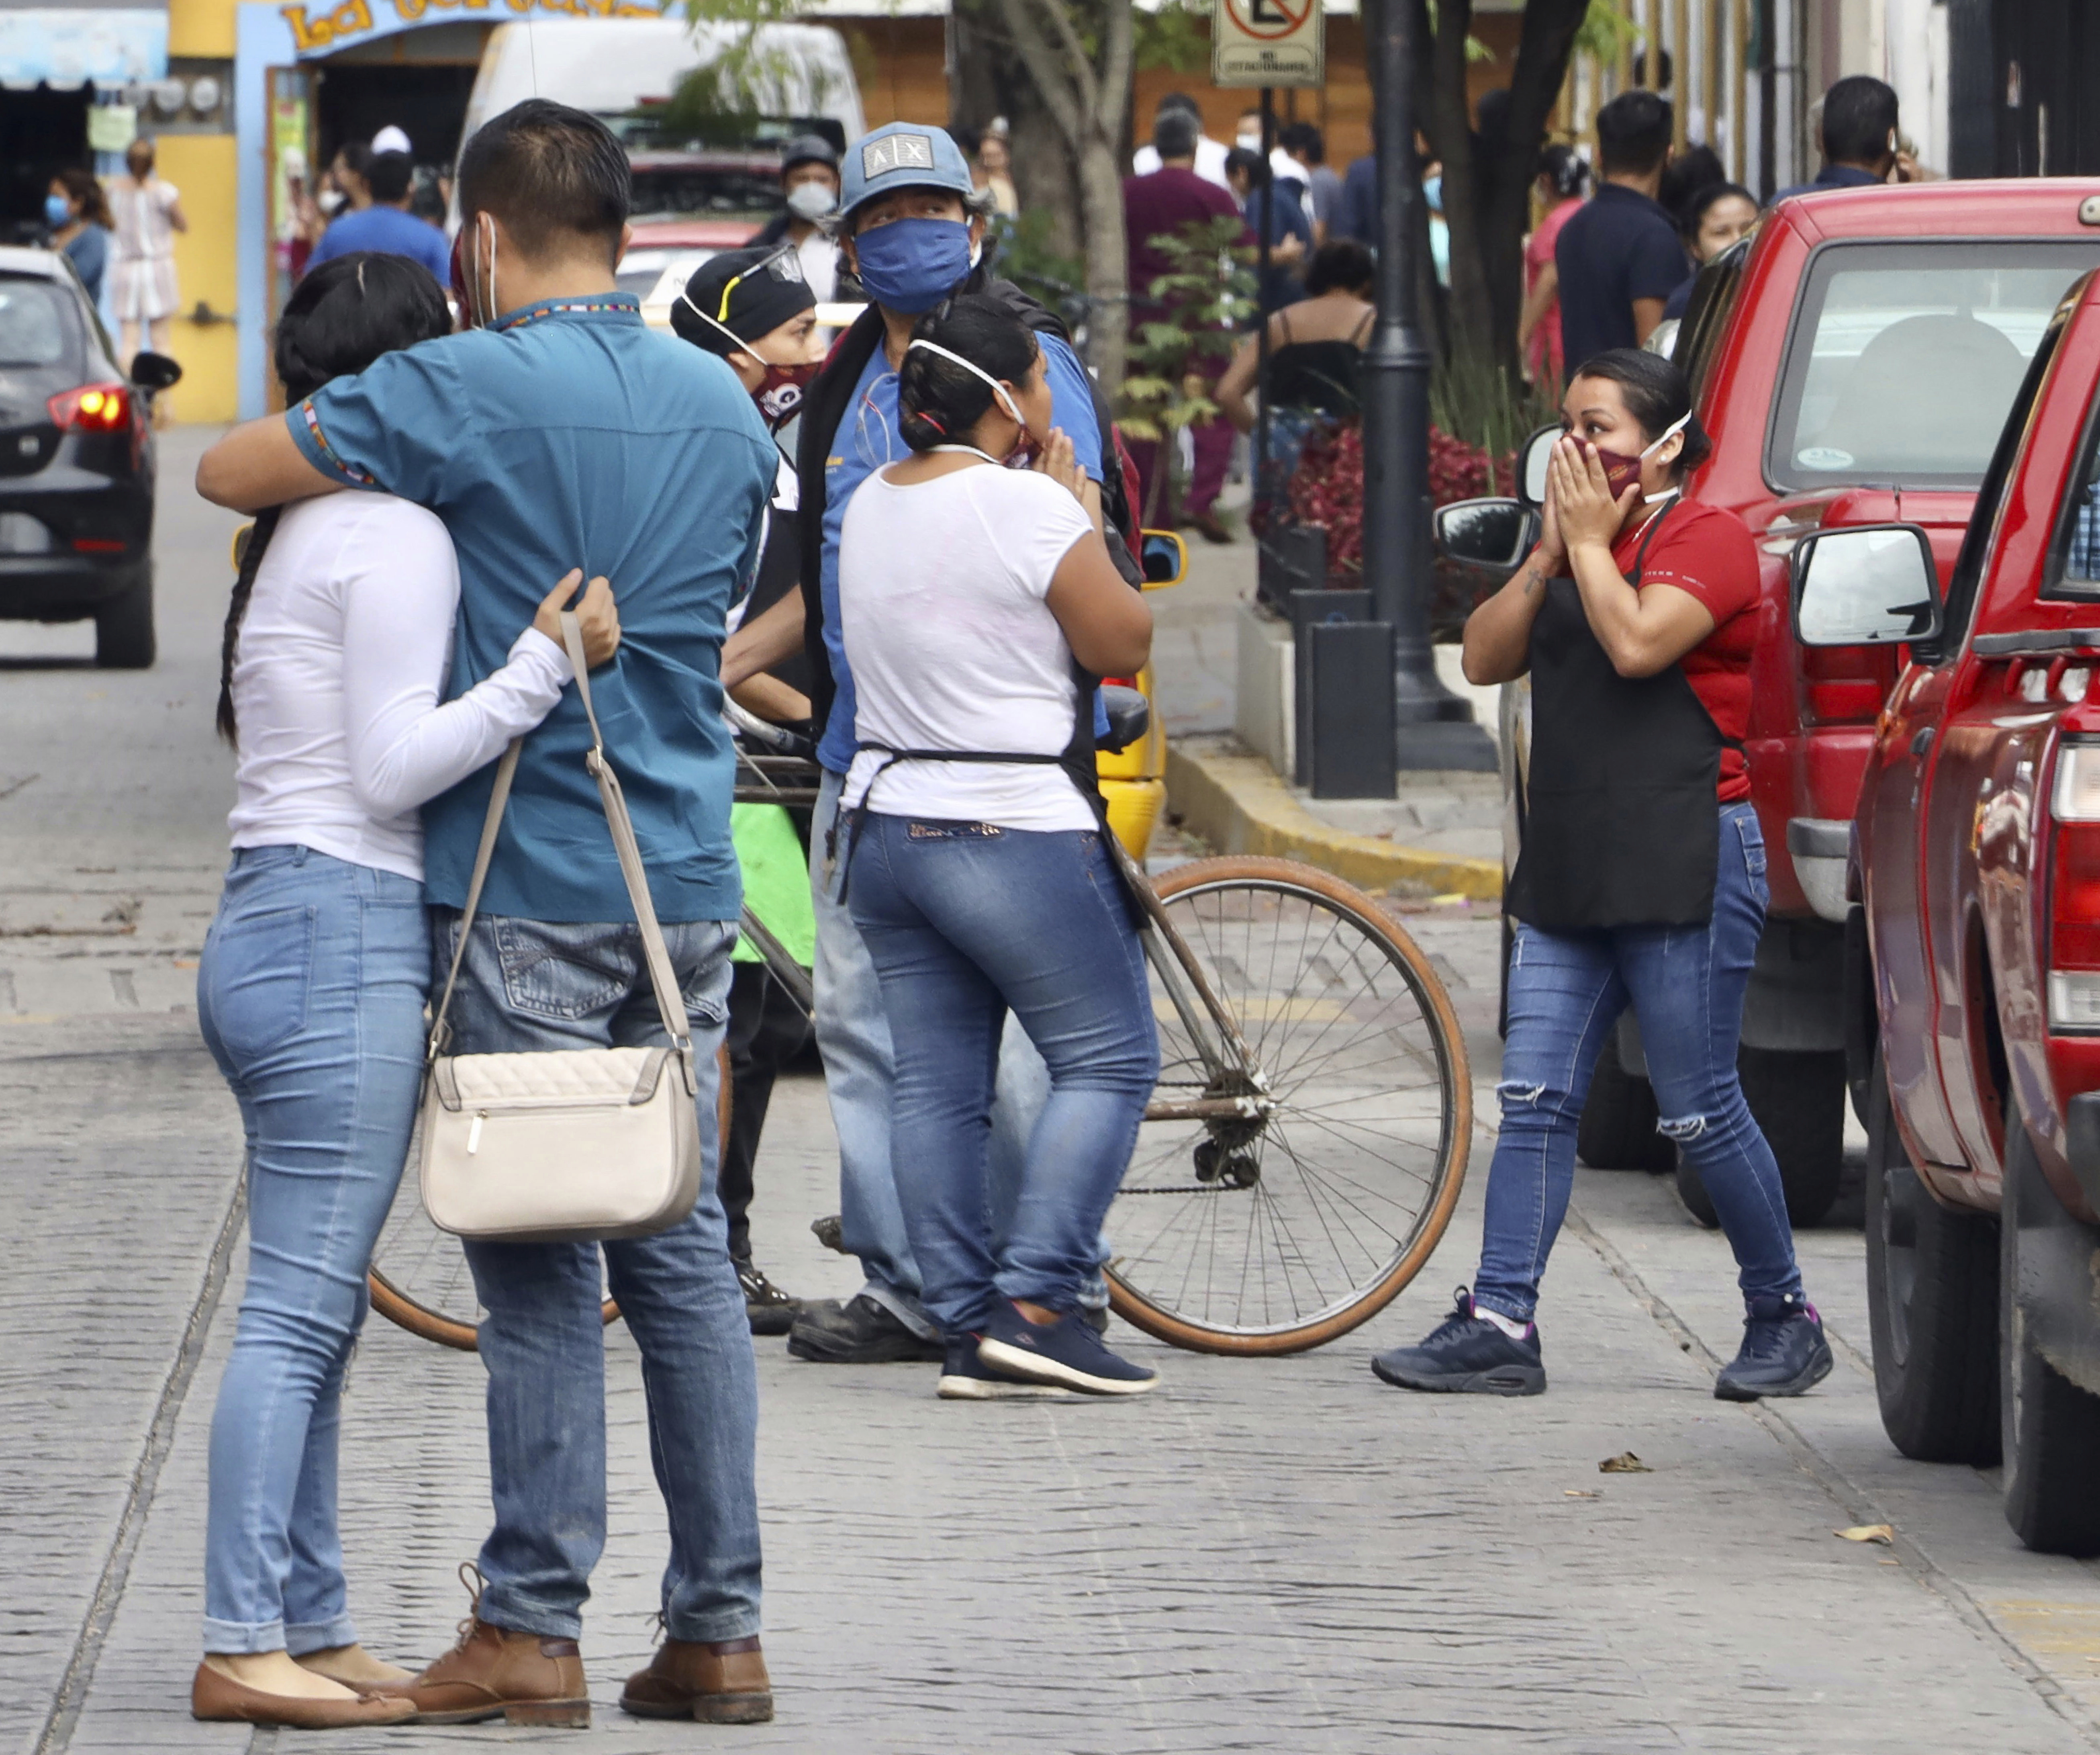 People react after a 7.7 earthquake in Oaxaca, Mexico, Tuesday, June 23, 2020. The earthquake centered near the resort of Huatulco in southern Mexico swayed buildings in Mexico City and sent thousands into the streets. (AP Photo/Luis Alberto Cruz Hernandez)